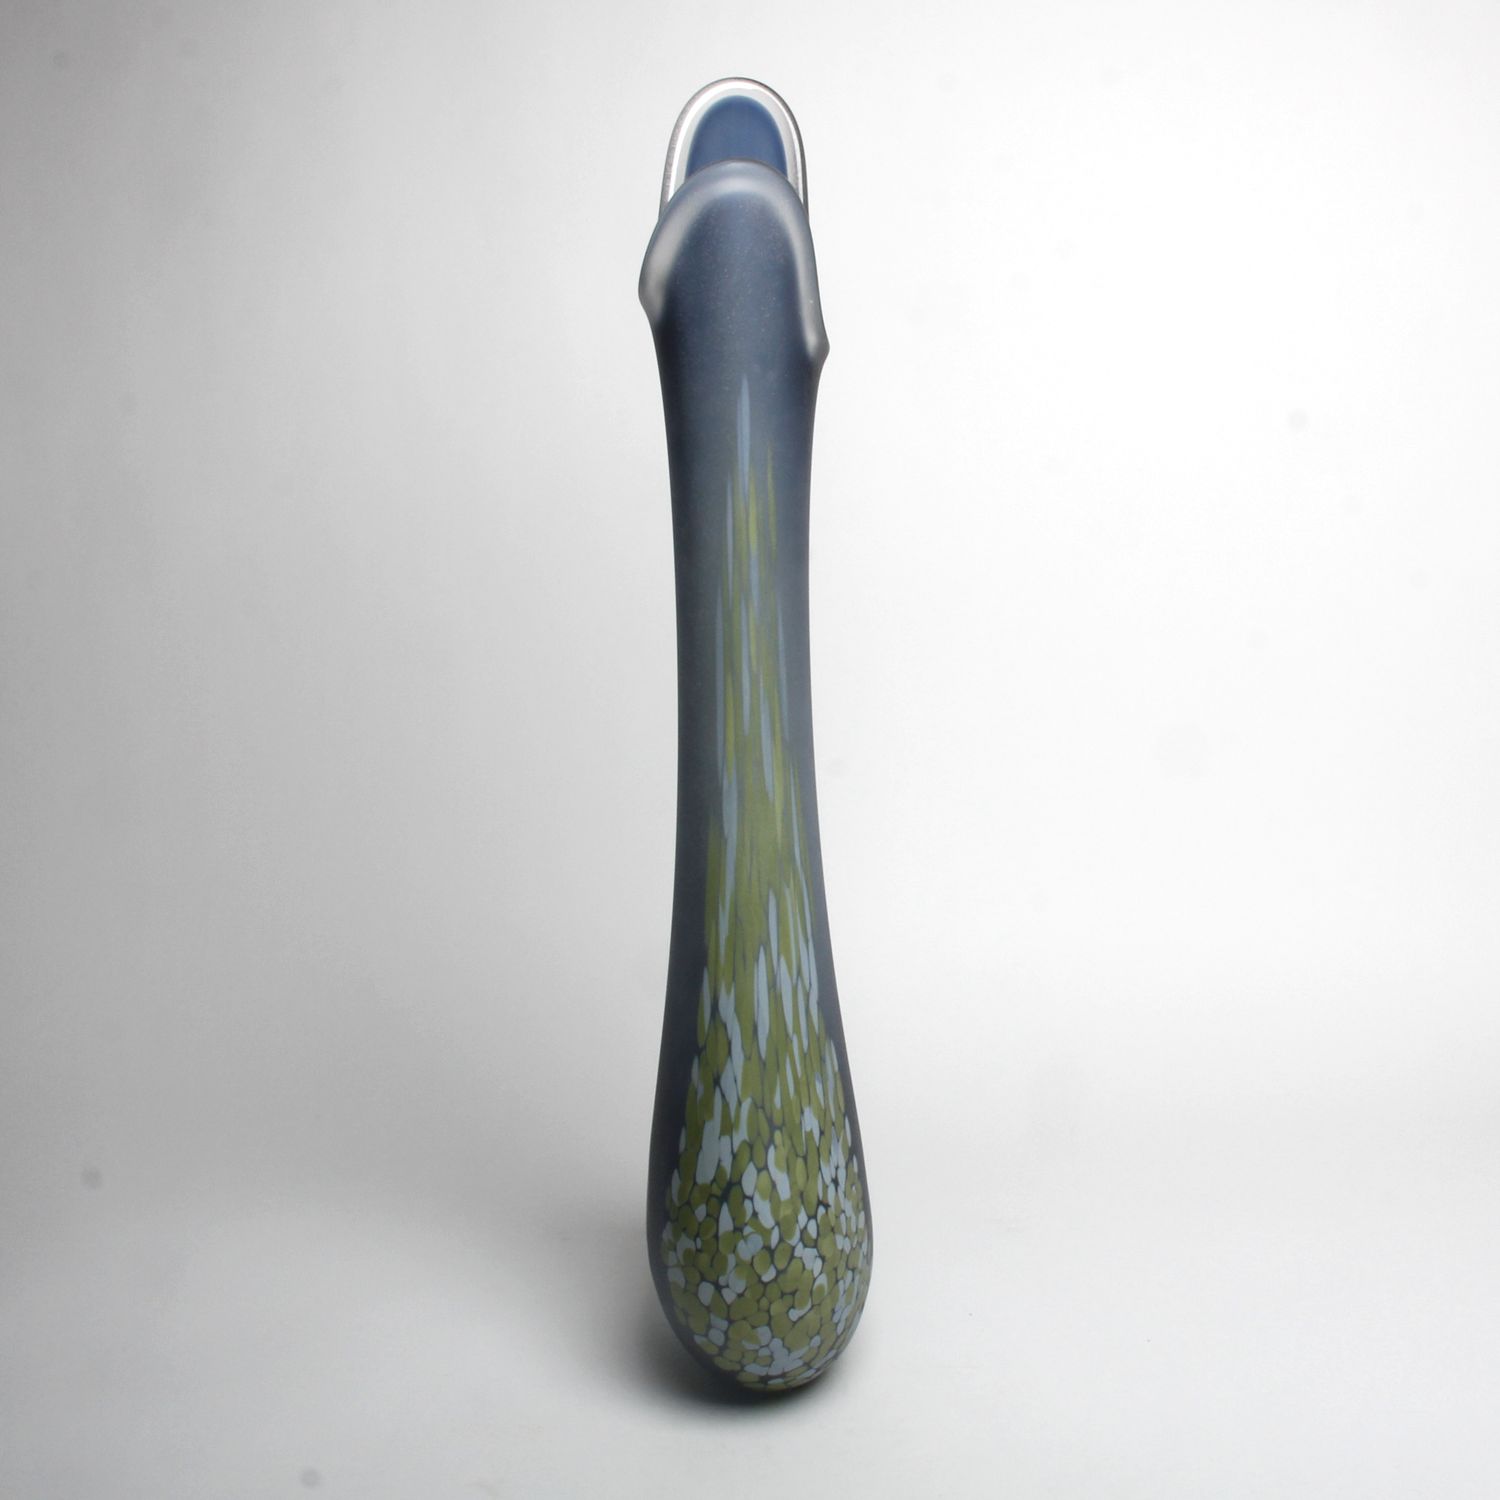 A&M Waddell Hunter: Large Flava Vase Product Image 3 of 3